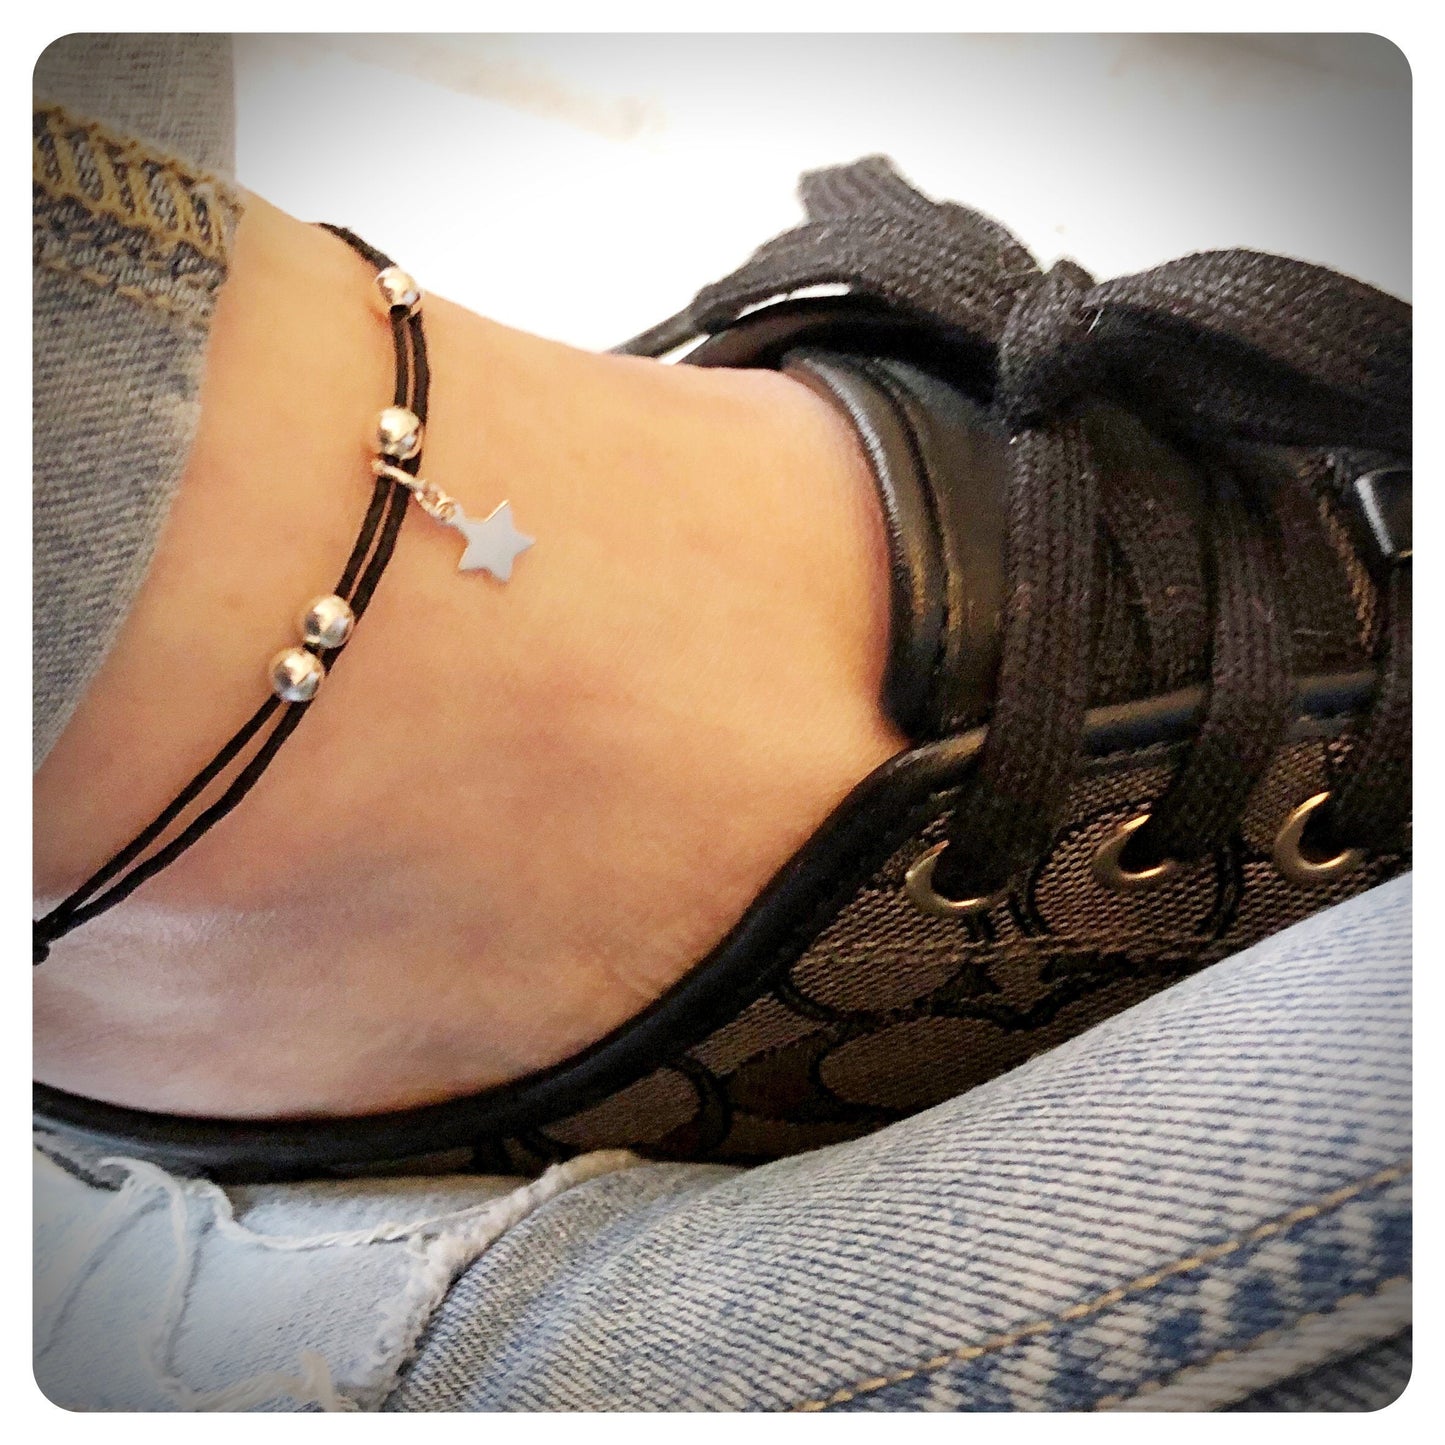 Sterling Silver Star Anklet, Star Ankle Bracelet, Silver Bead Anklet, Adjustable Cord Ankle Bracelet, Silver Beach Jewellery, Star Boho Gift